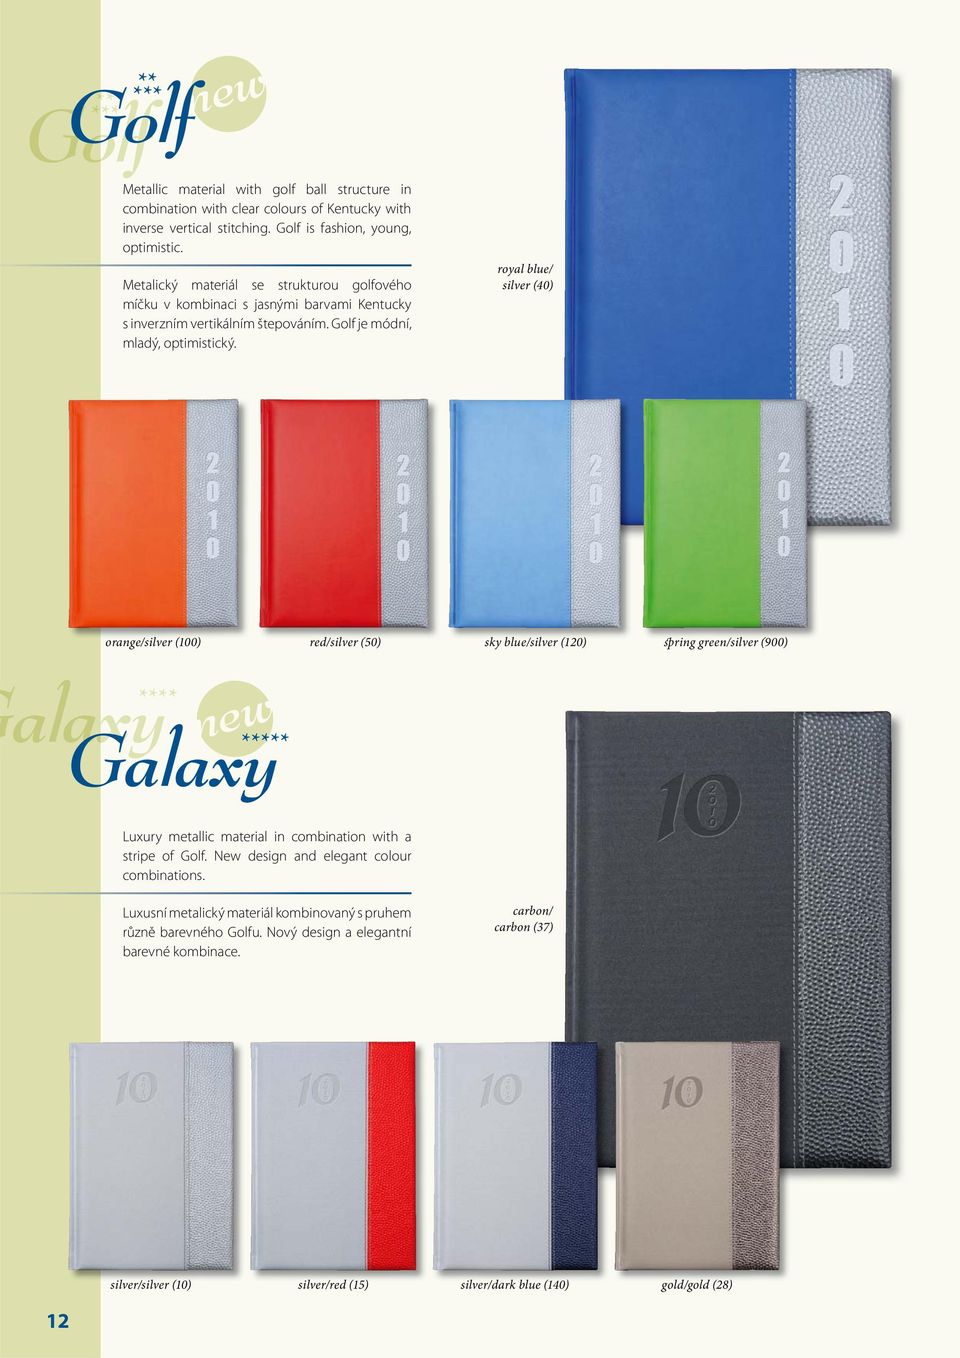 royal blue/ silver (40) orange/silver /il (00) red/silver (50) sky blue/silver (20) spring spi green/silver /il (900) alax xy ** Galaxy new ** Luxury metallic material in combination with a stripe